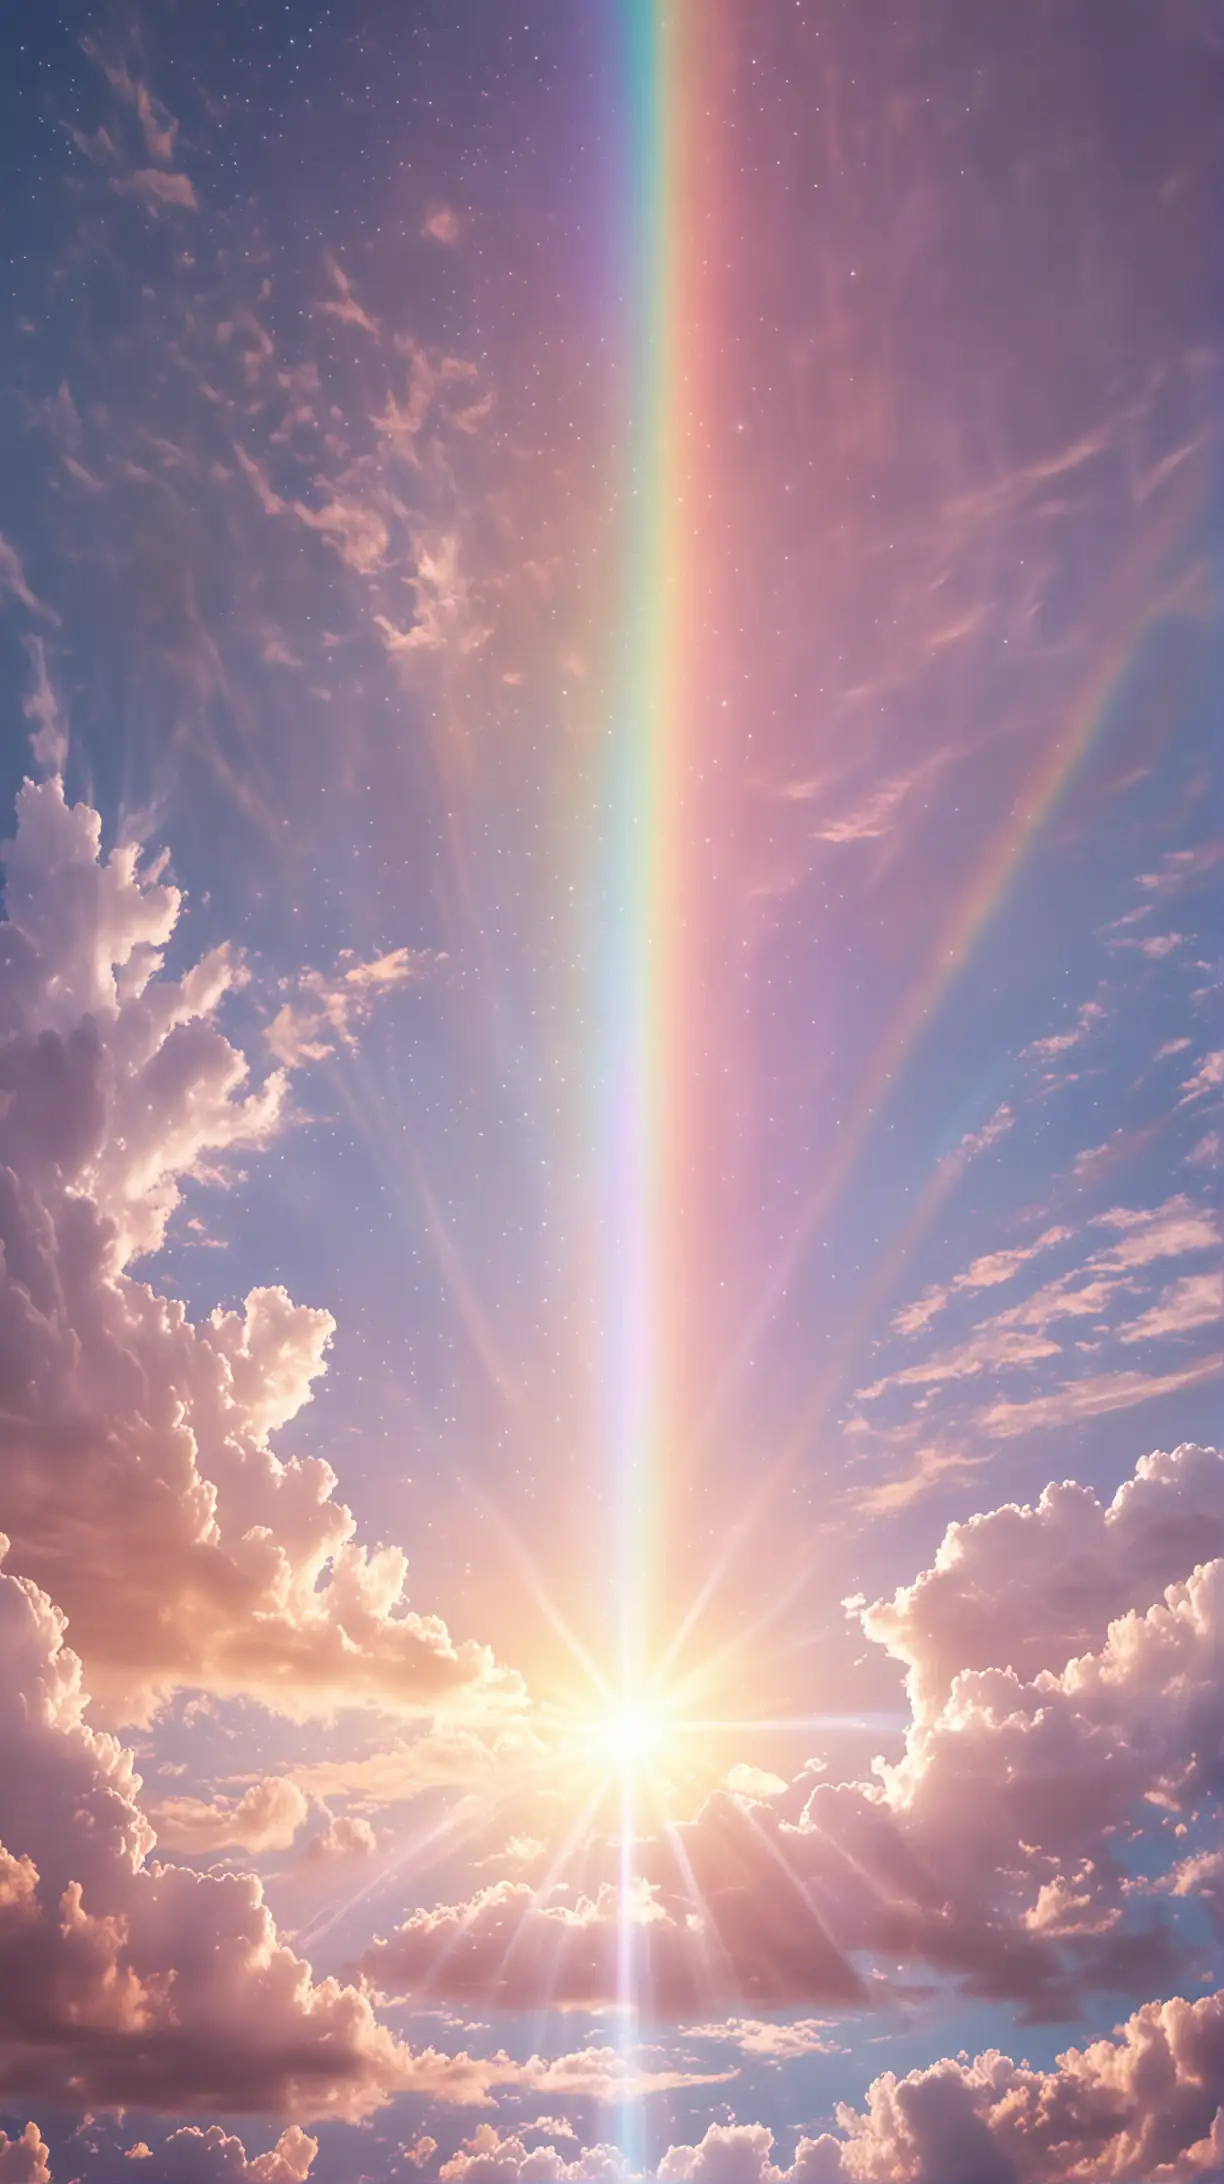 magical ethereal transcendent pastel rainbow heavenly sky, with white and rainbow light beam coming down middle